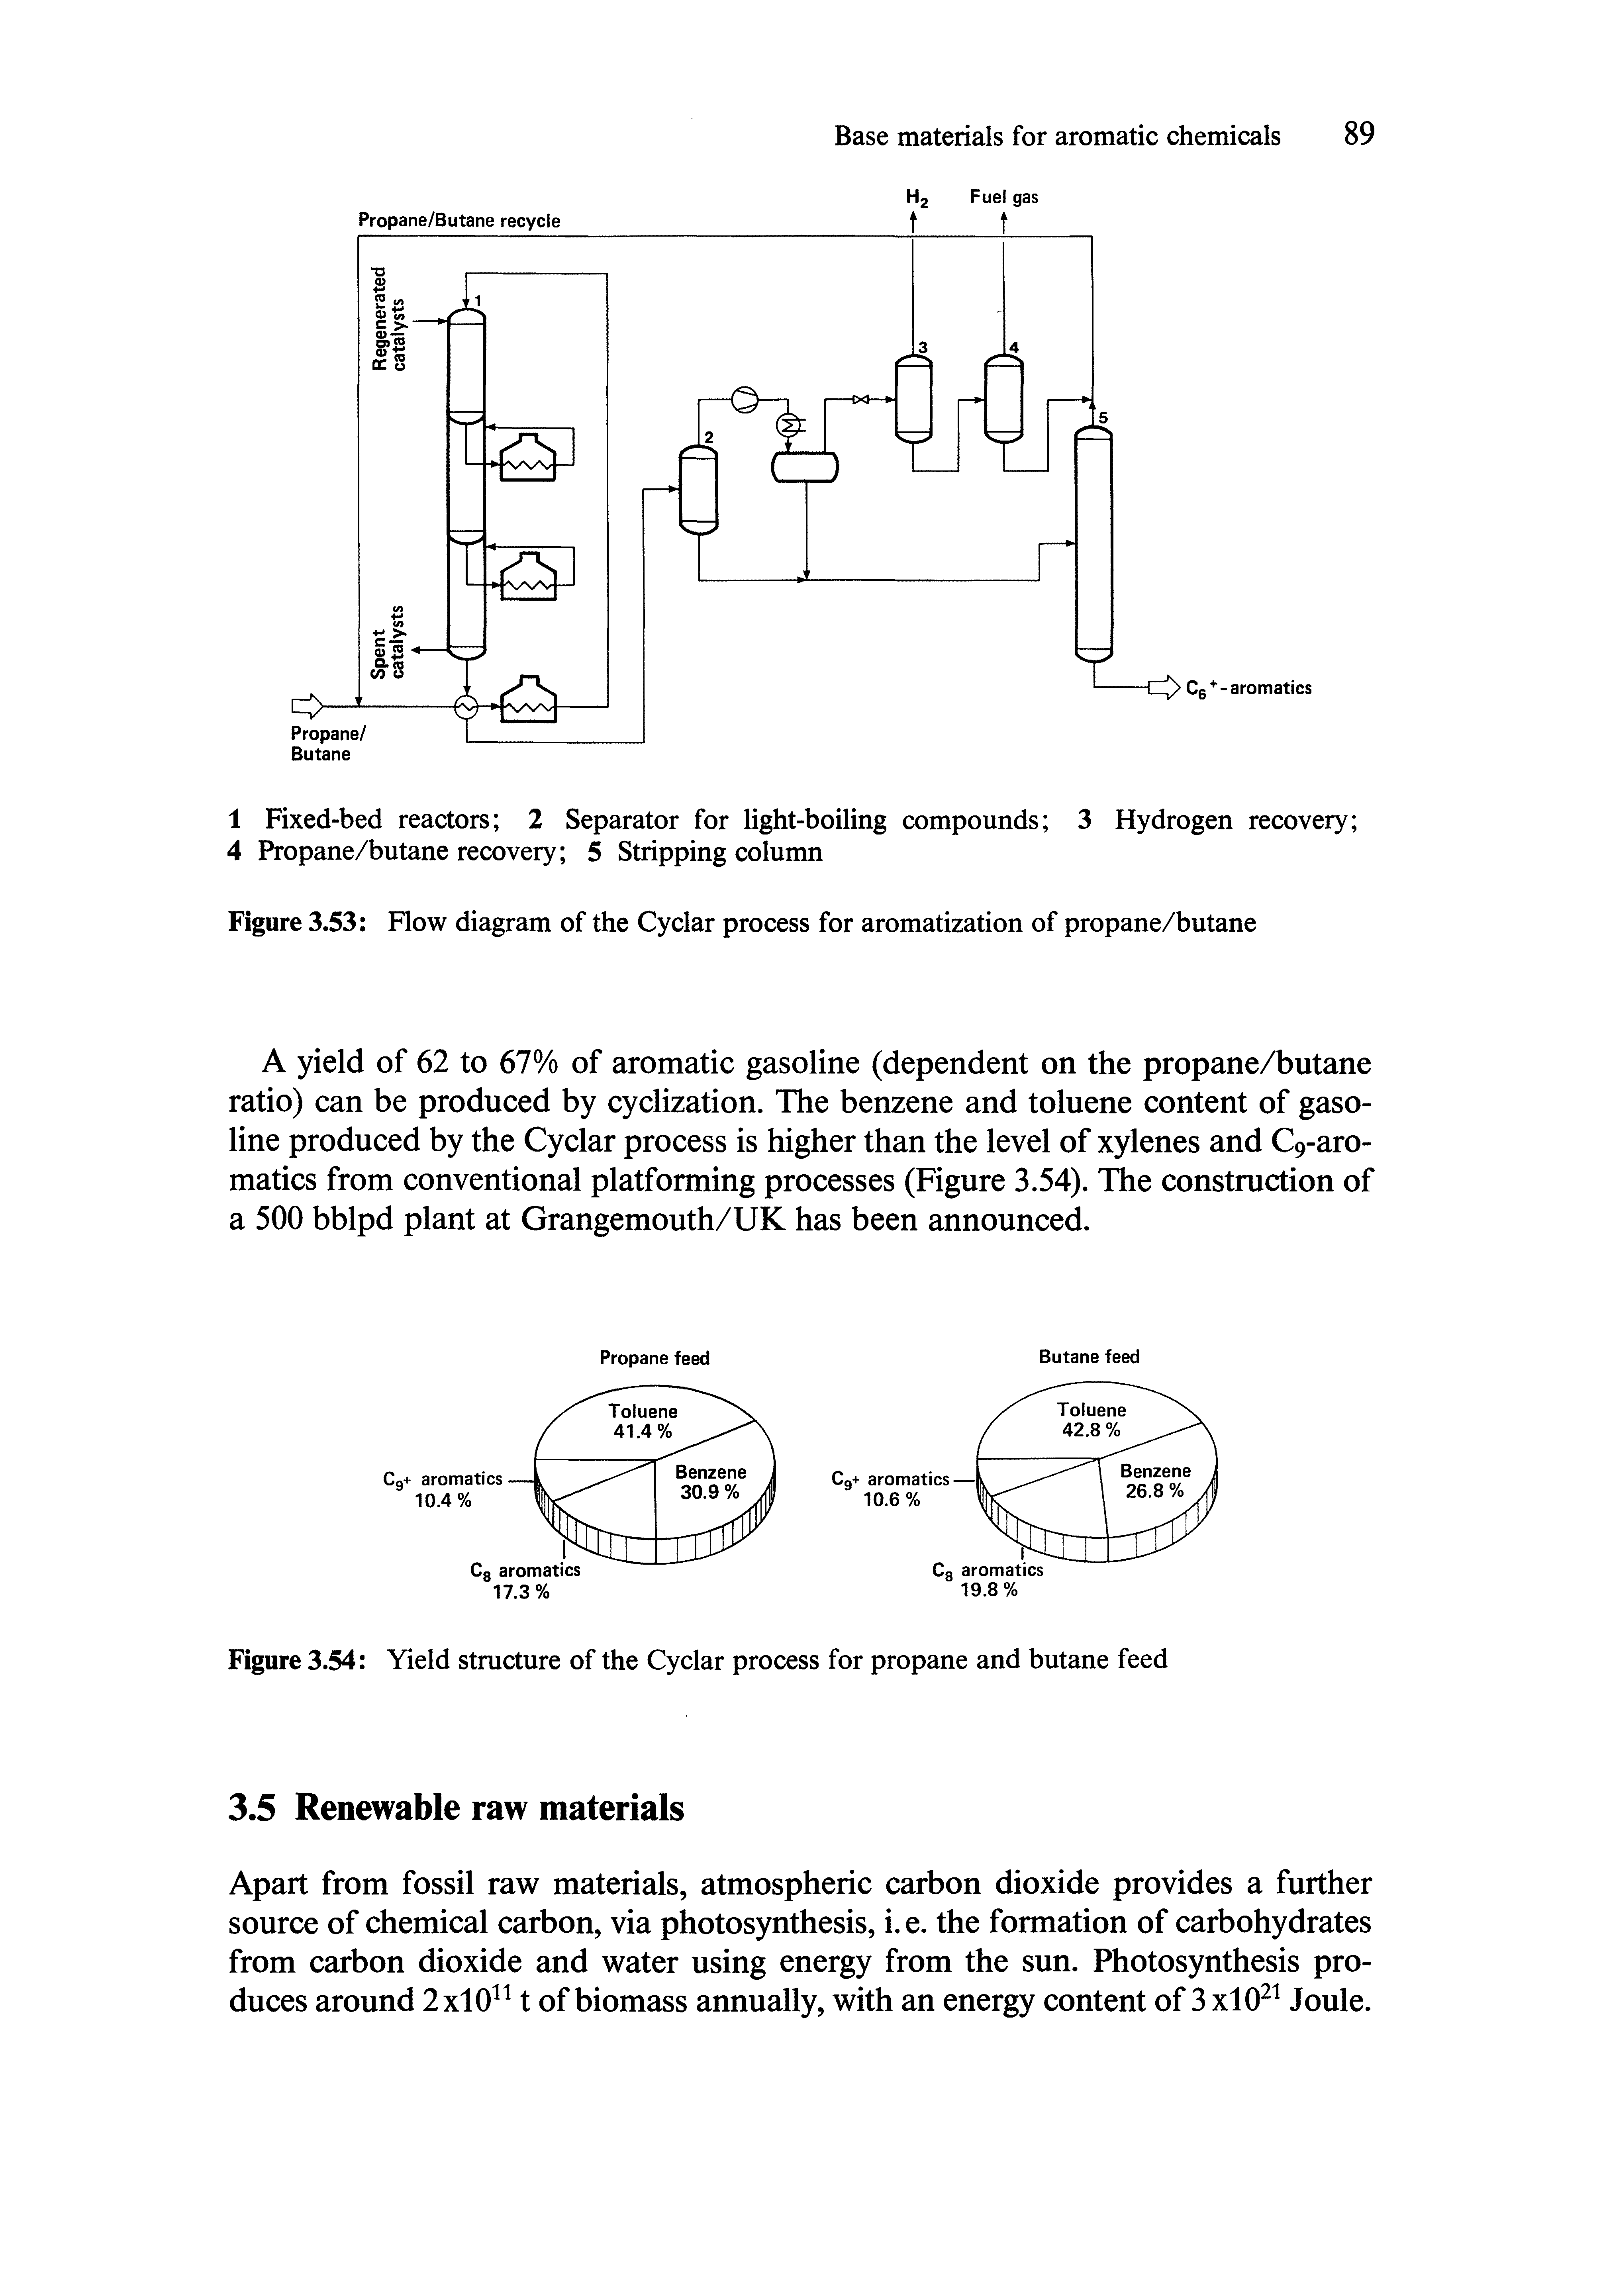 Figure 3.53 Flow diagram of the Cyclar process for aromatization of propane/butane...